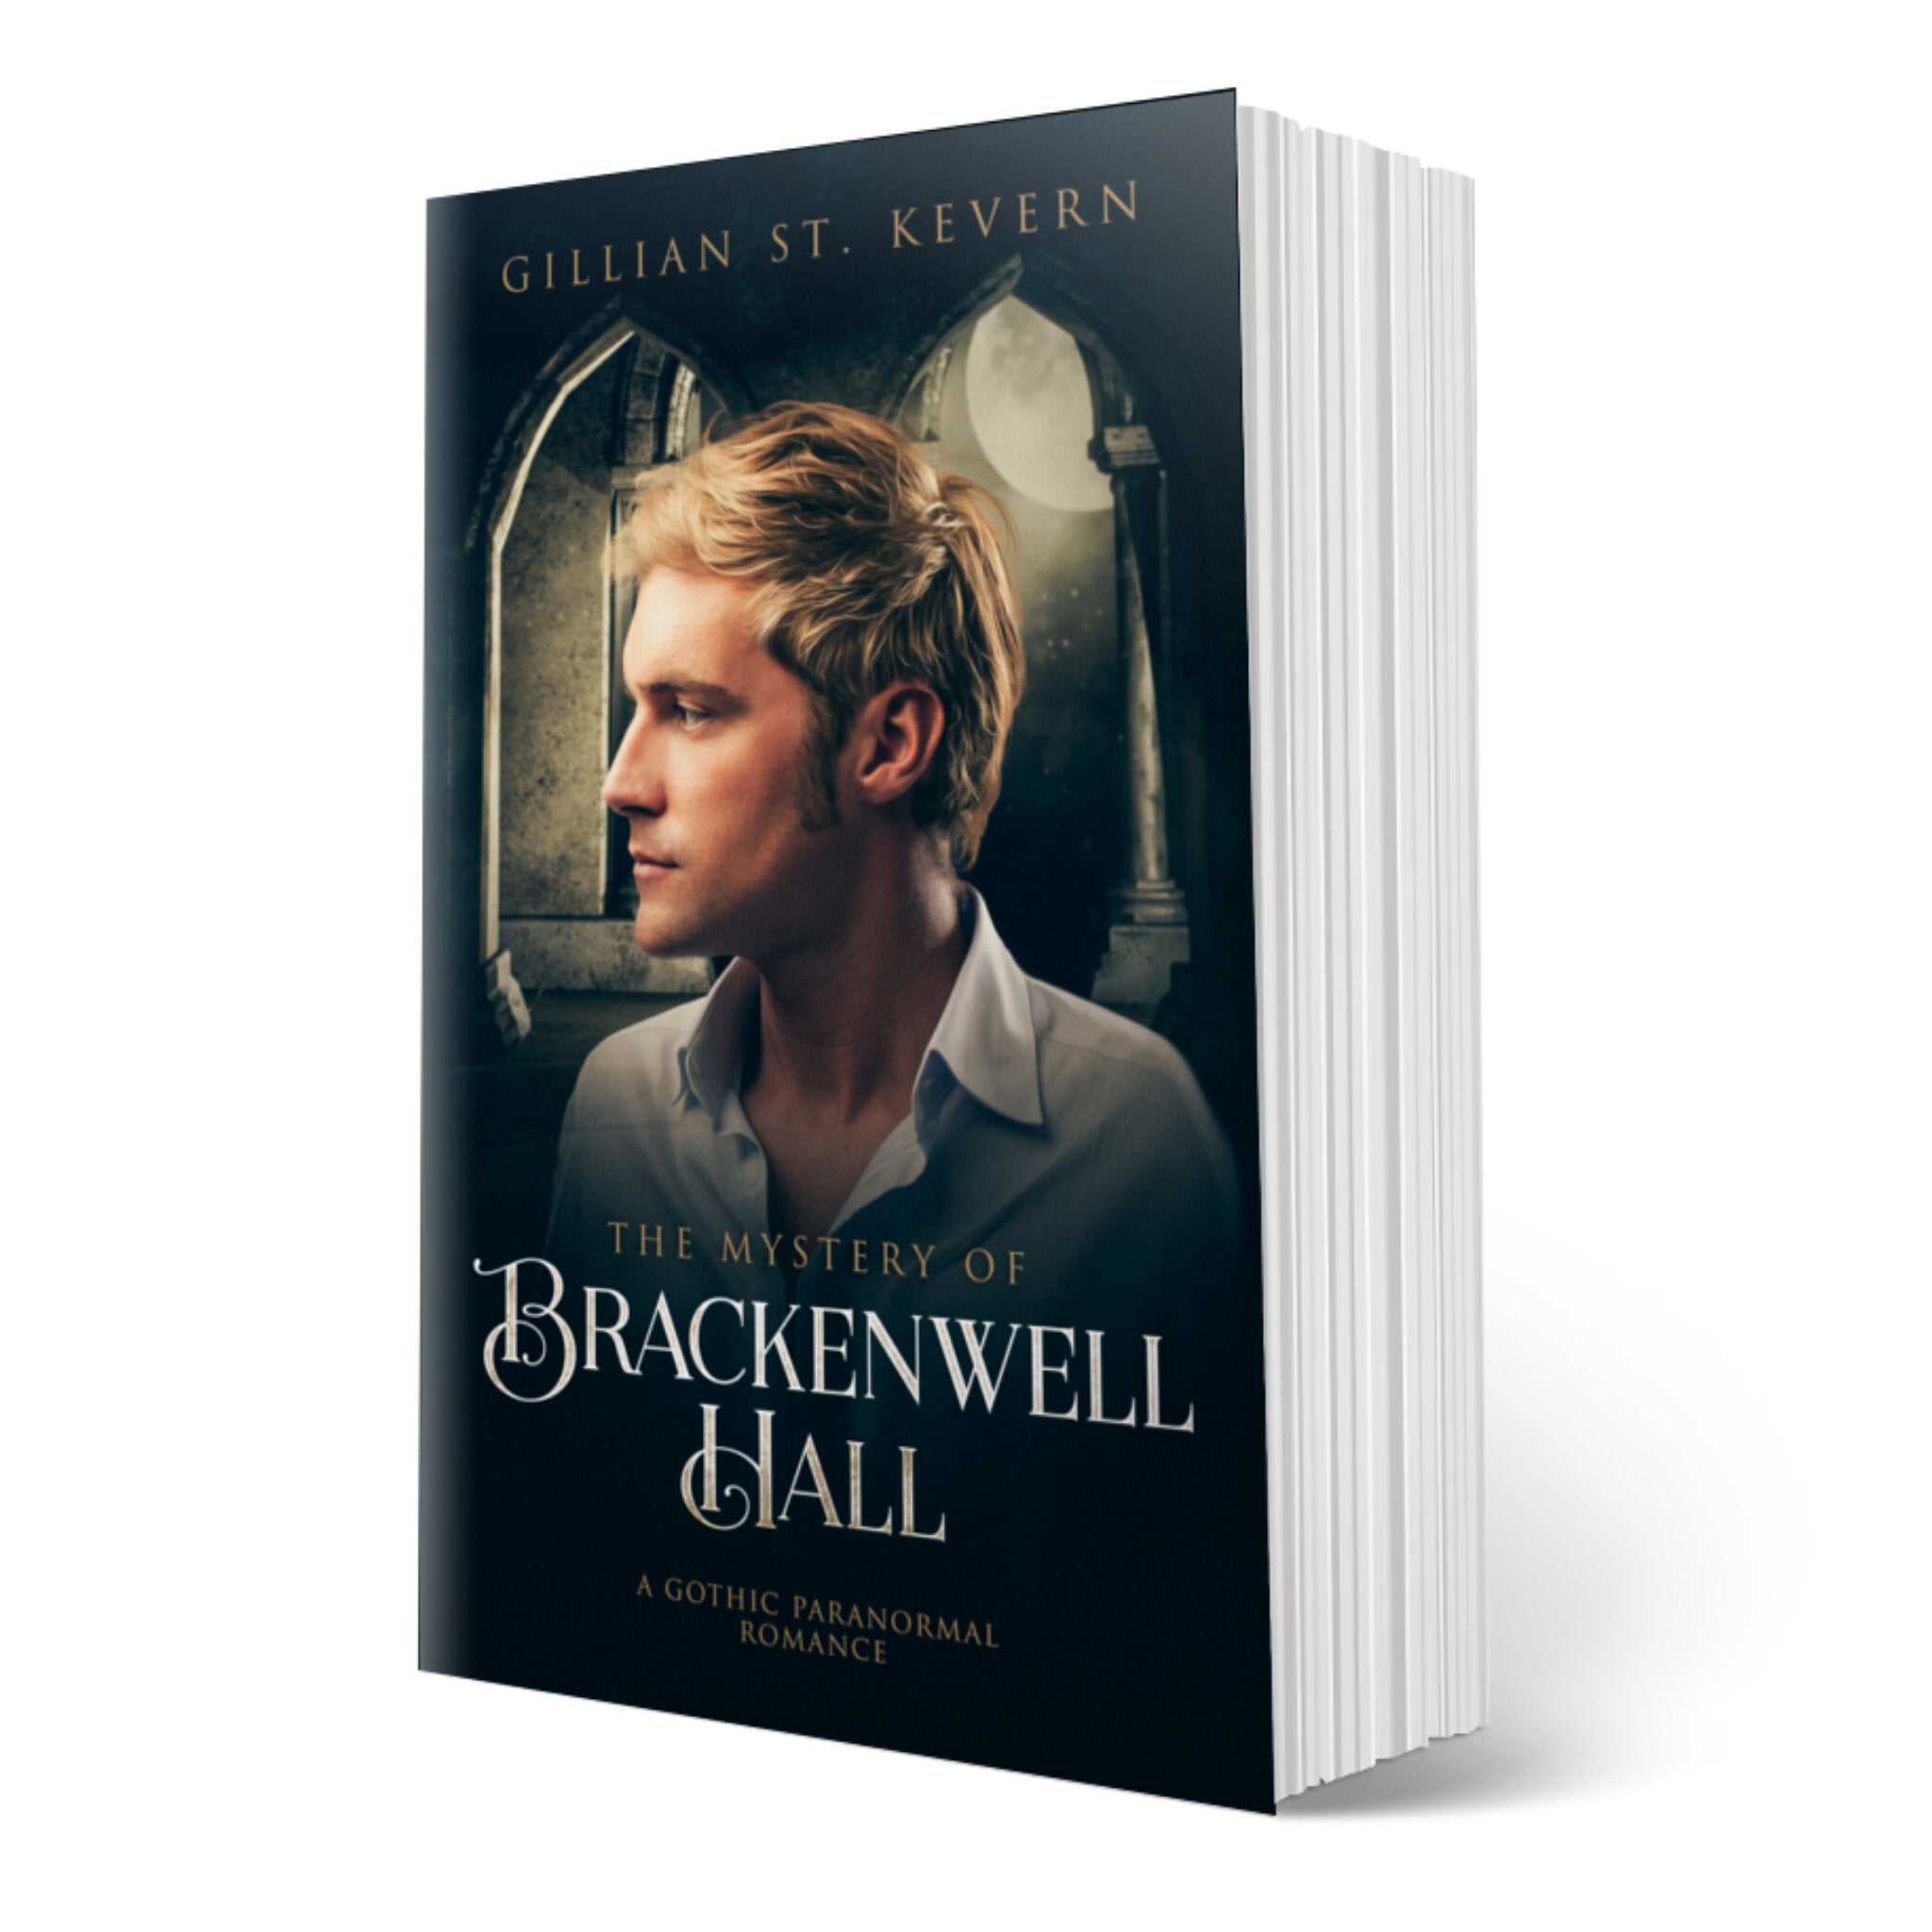 The Mystery of Brackenwell Hall cover, a gay gothic romance: A pensive young man with blond hair looks to the left, marble columns behind him with the light of the full moon peeking through.